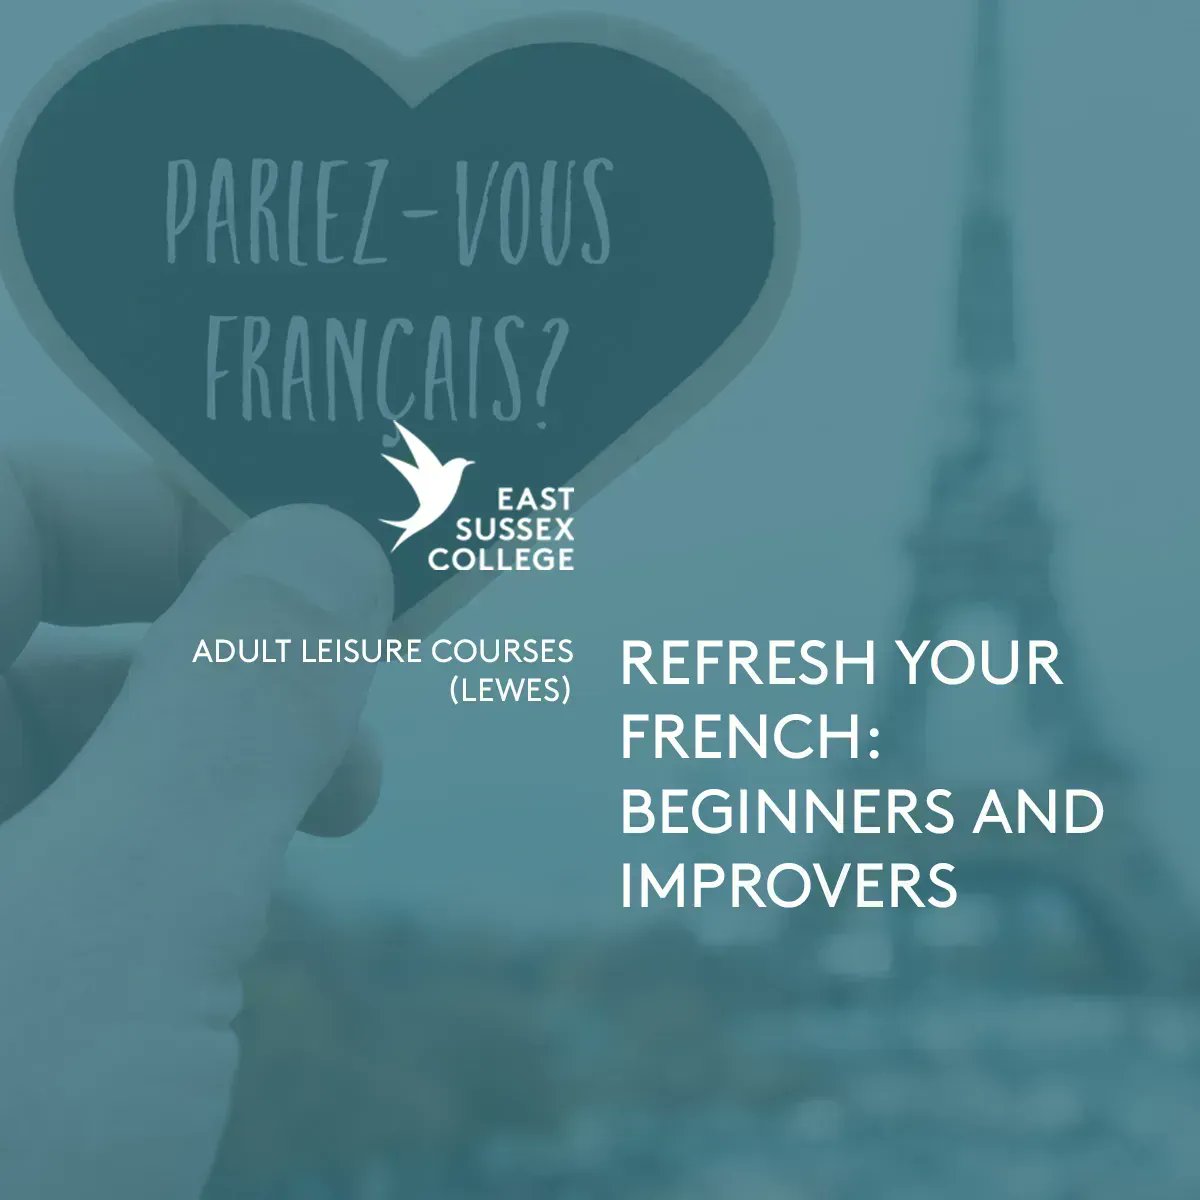 Have you ever wanted to refresh your school #French or start learning again? If so then this course is for you! #adultleisure #courses 
adult.escg.ac.uk/courses/englis…